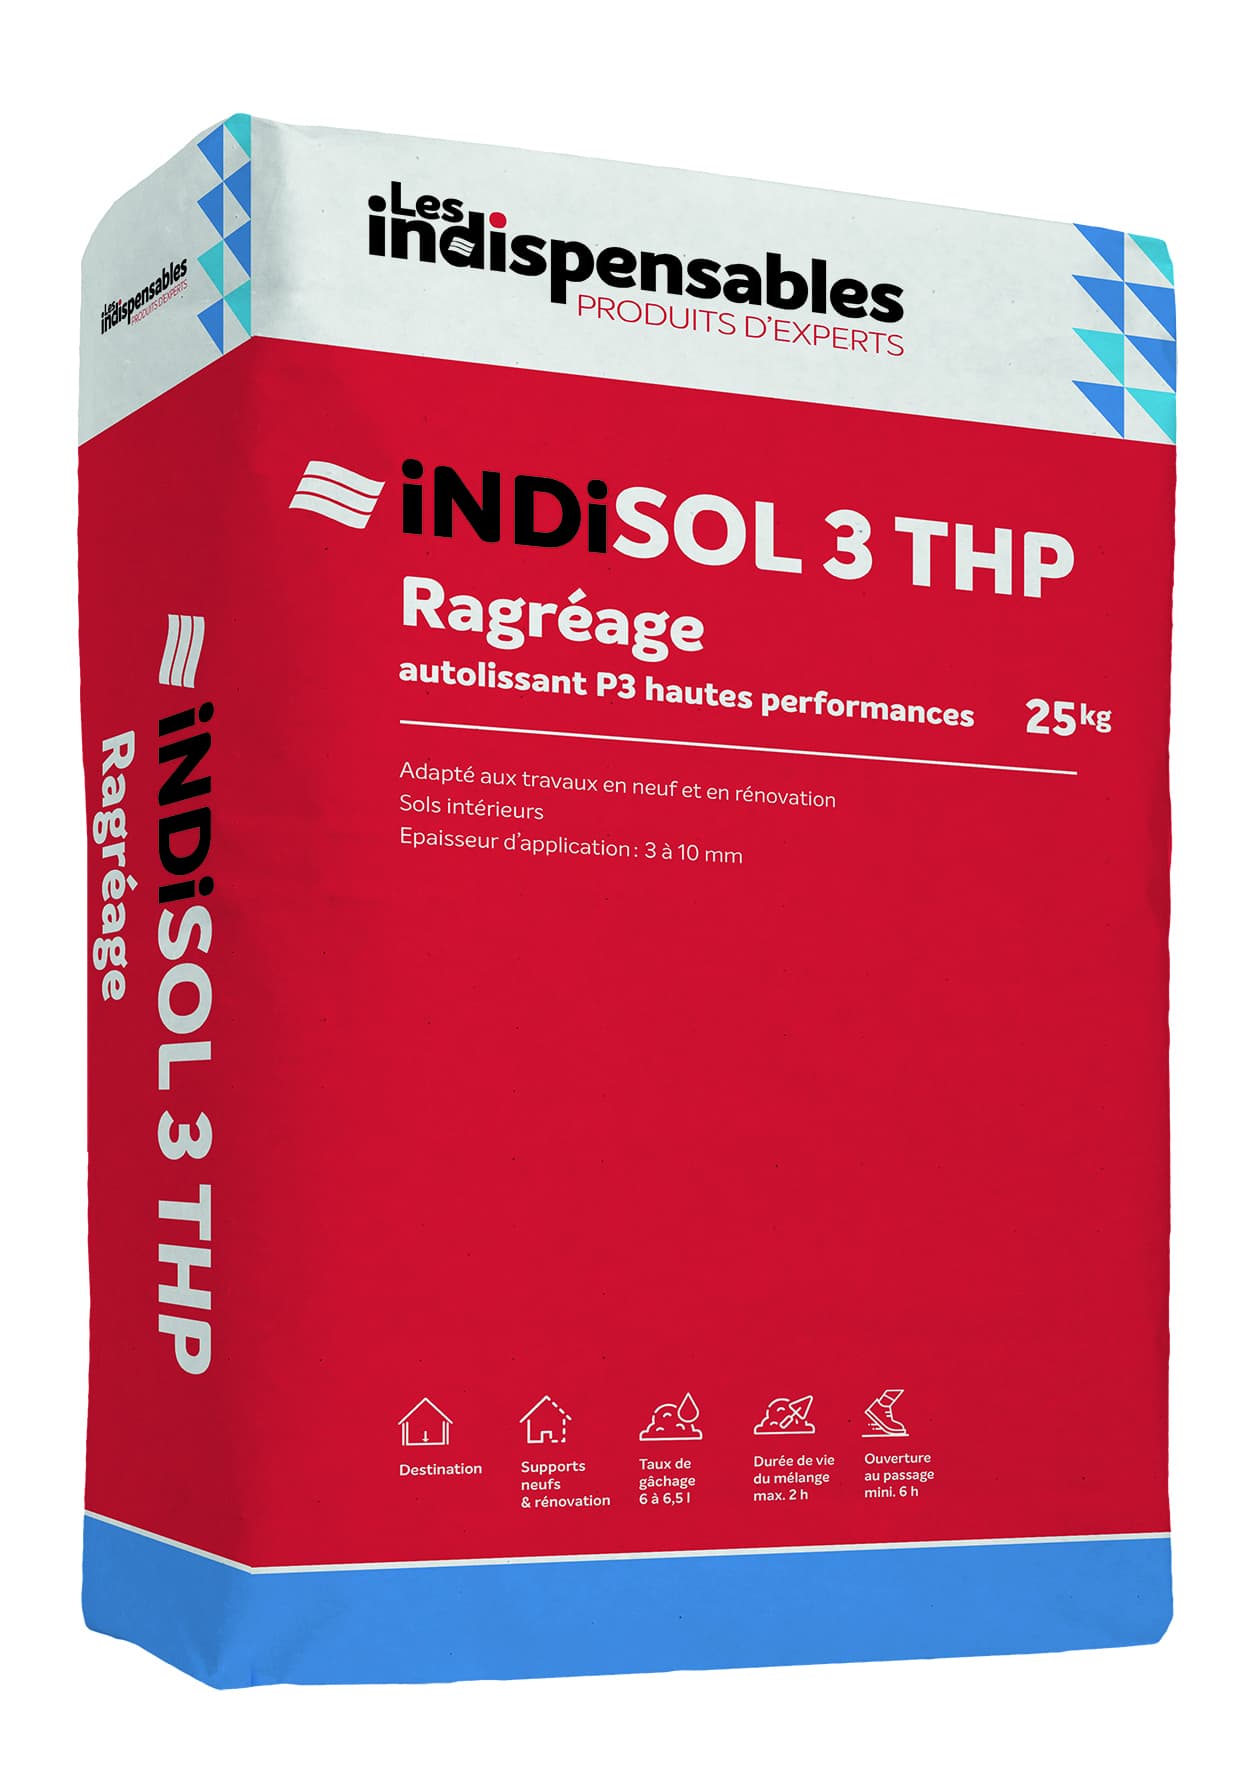 Indisol 3 THP - Les indispensables